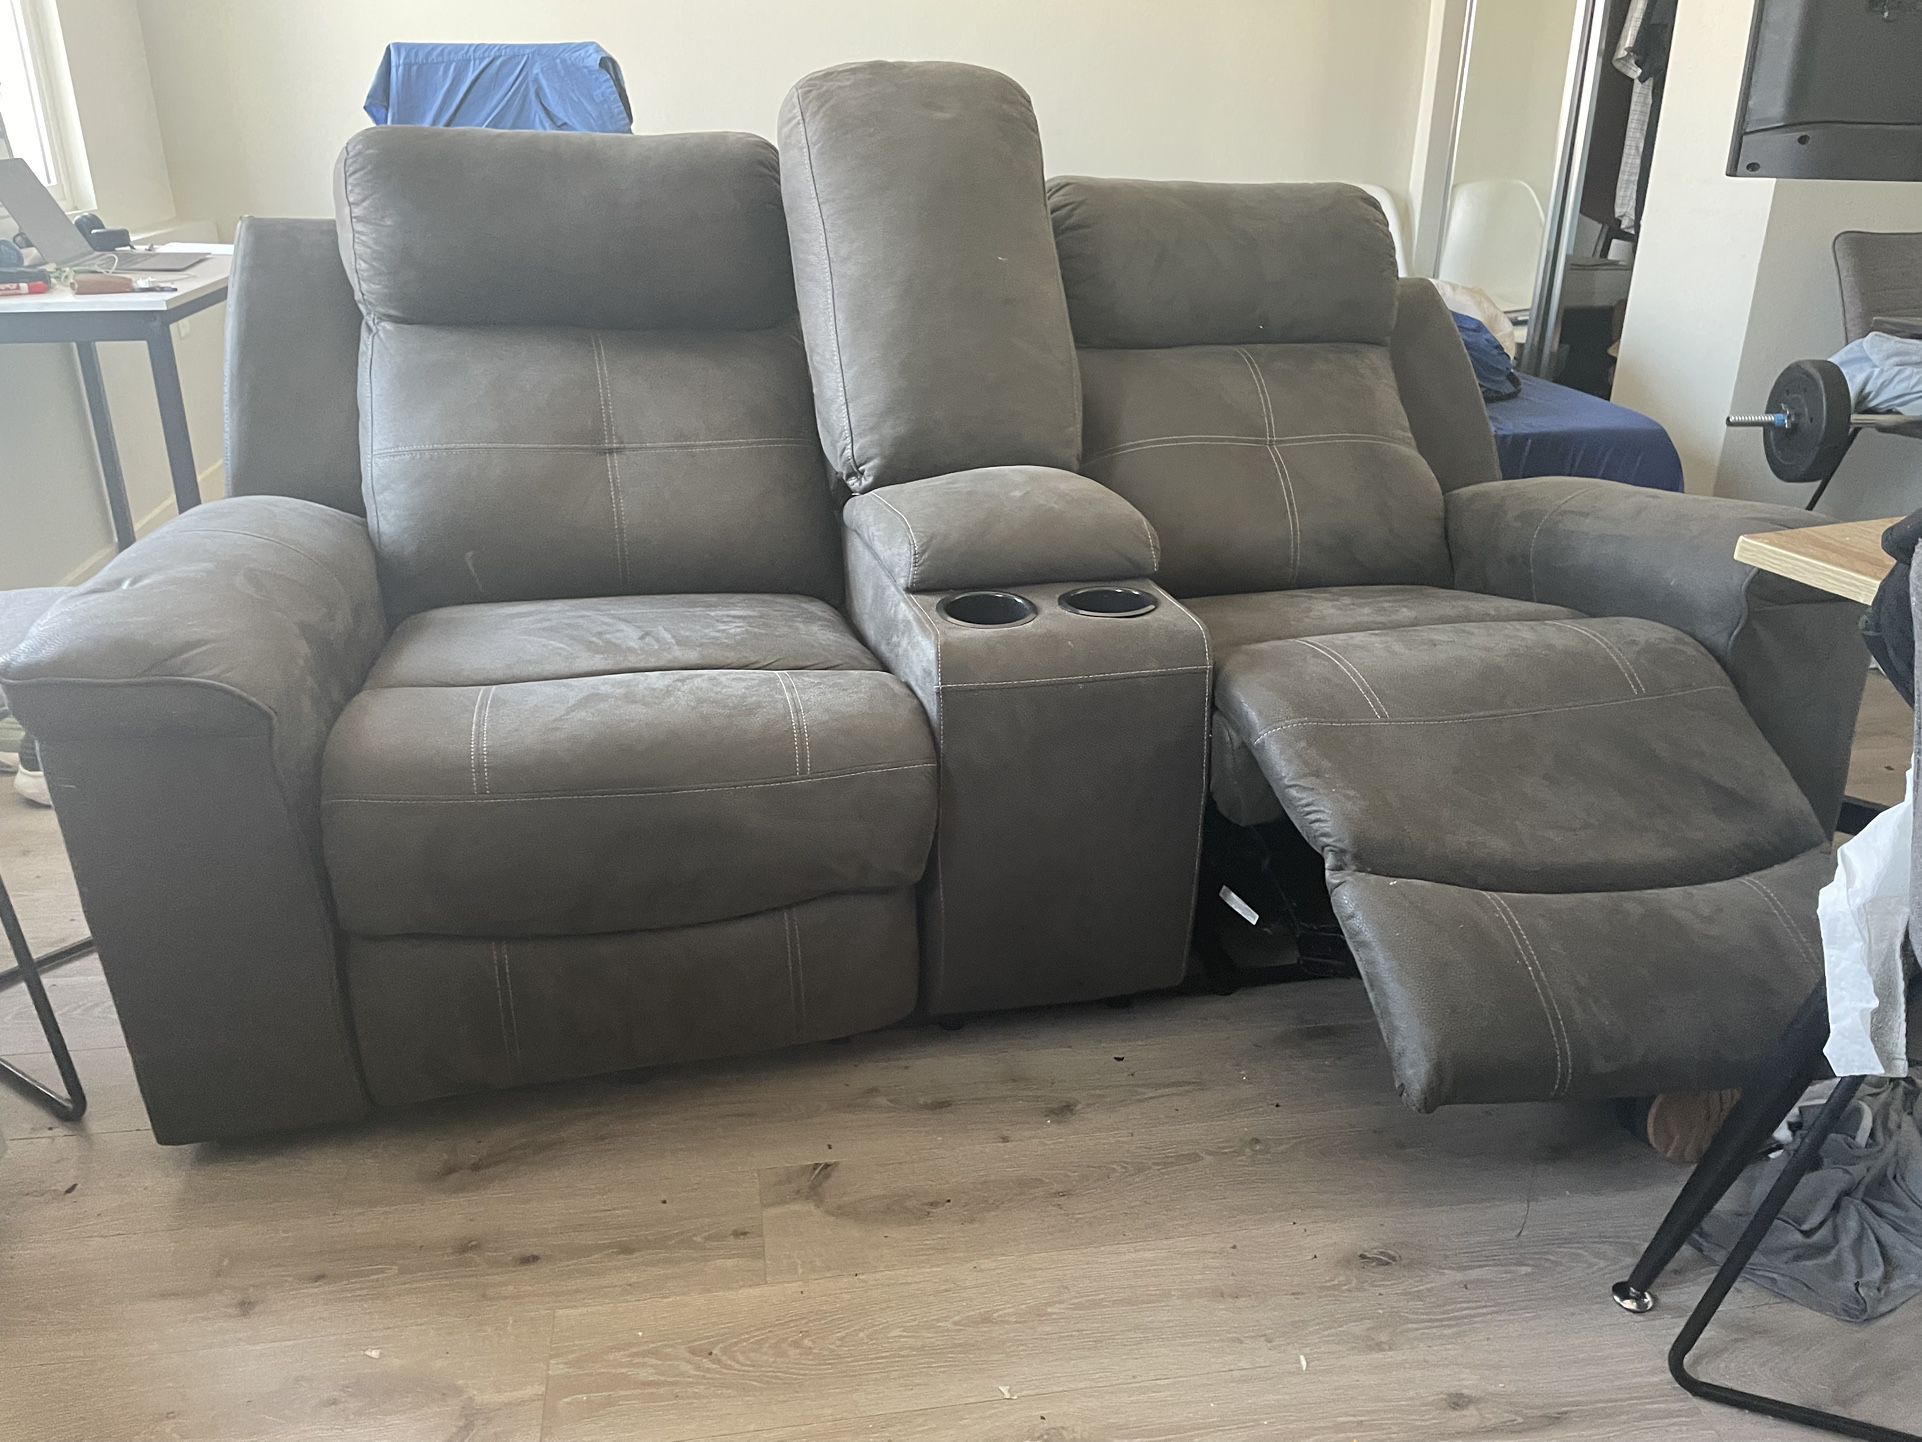 Double Recliner Couch  